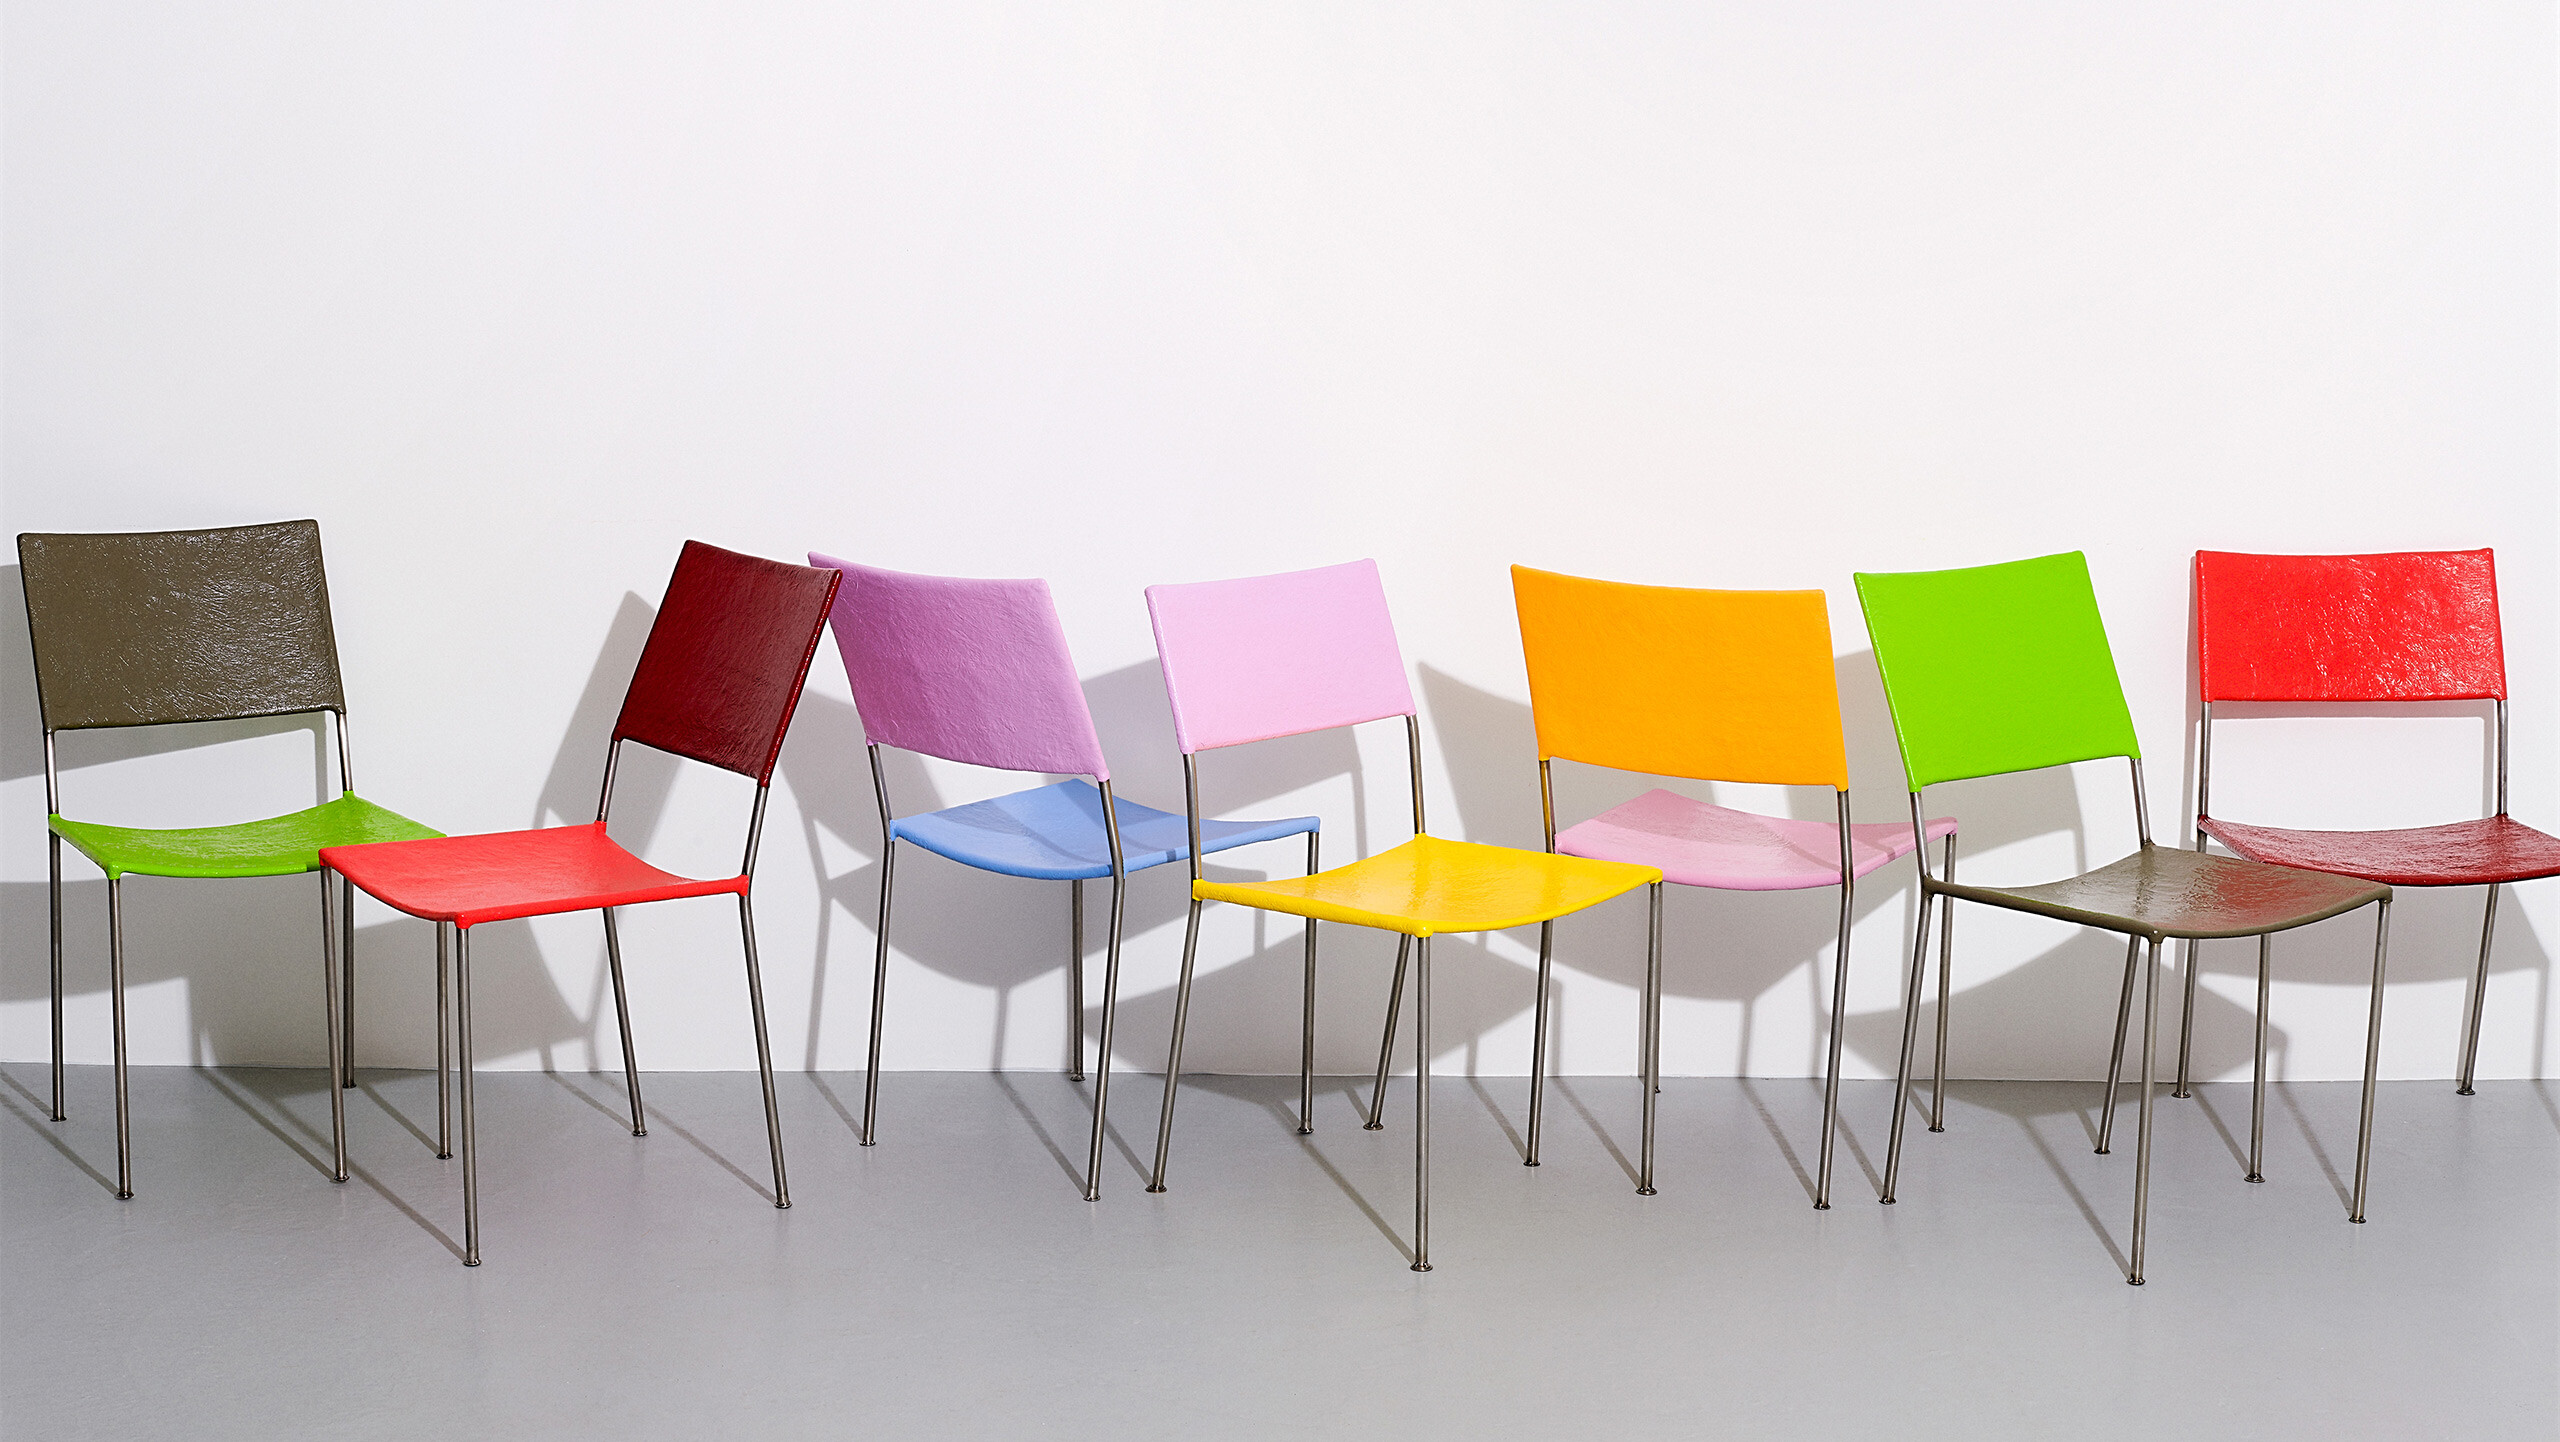 A photograph of a grouping of Franz West chairs, from 2019.